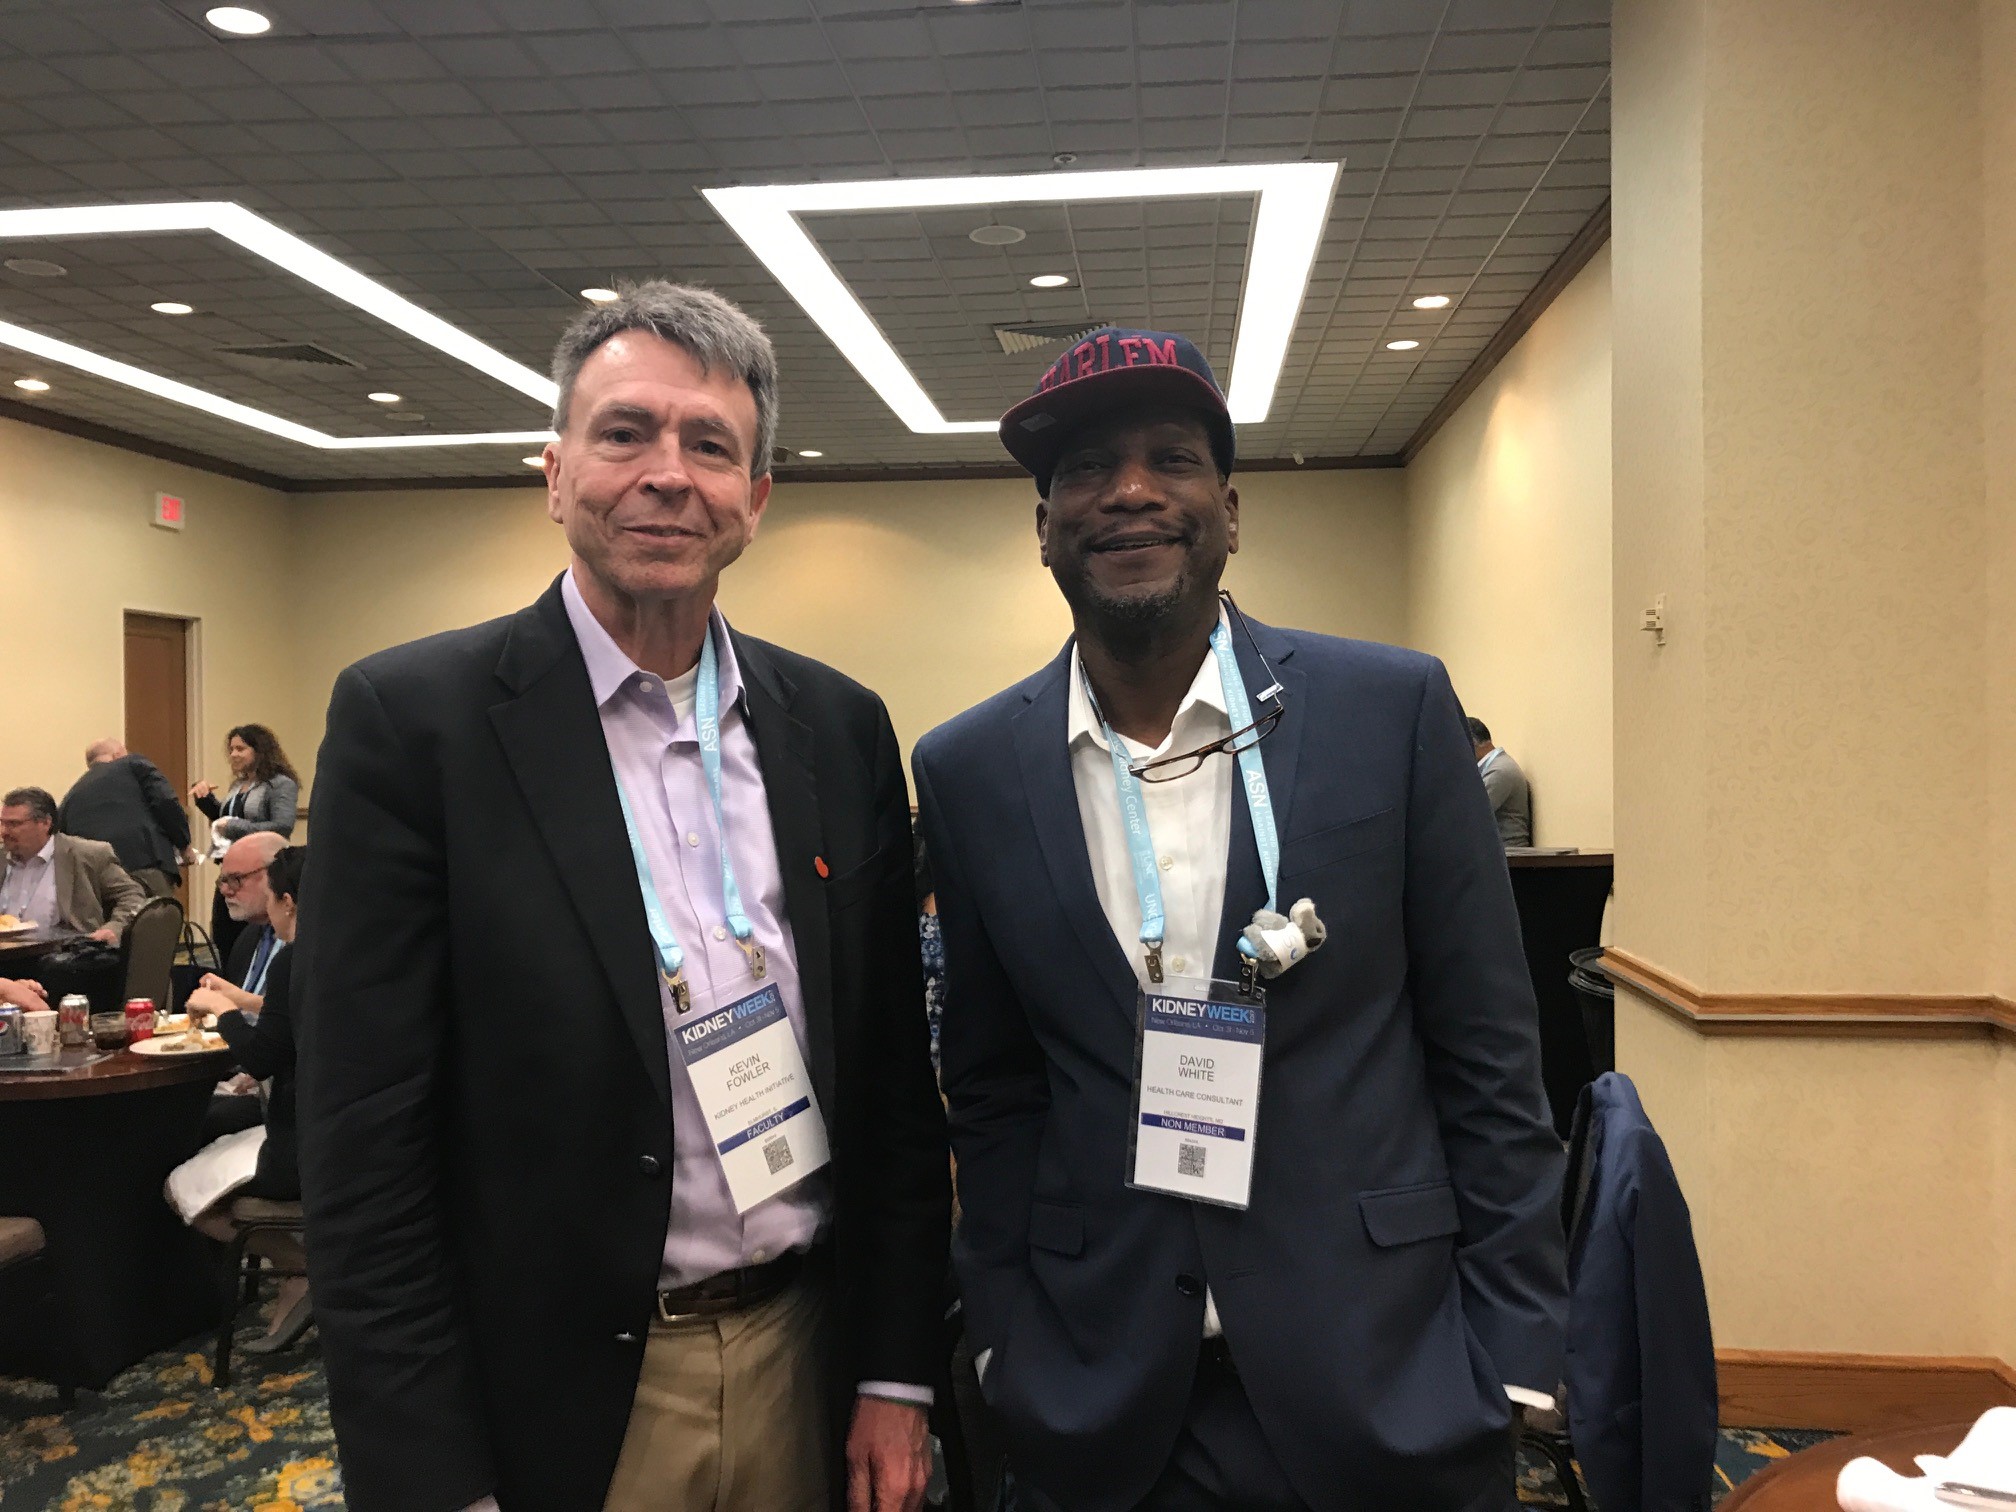 kevin-and-dave-at-kidneywk17